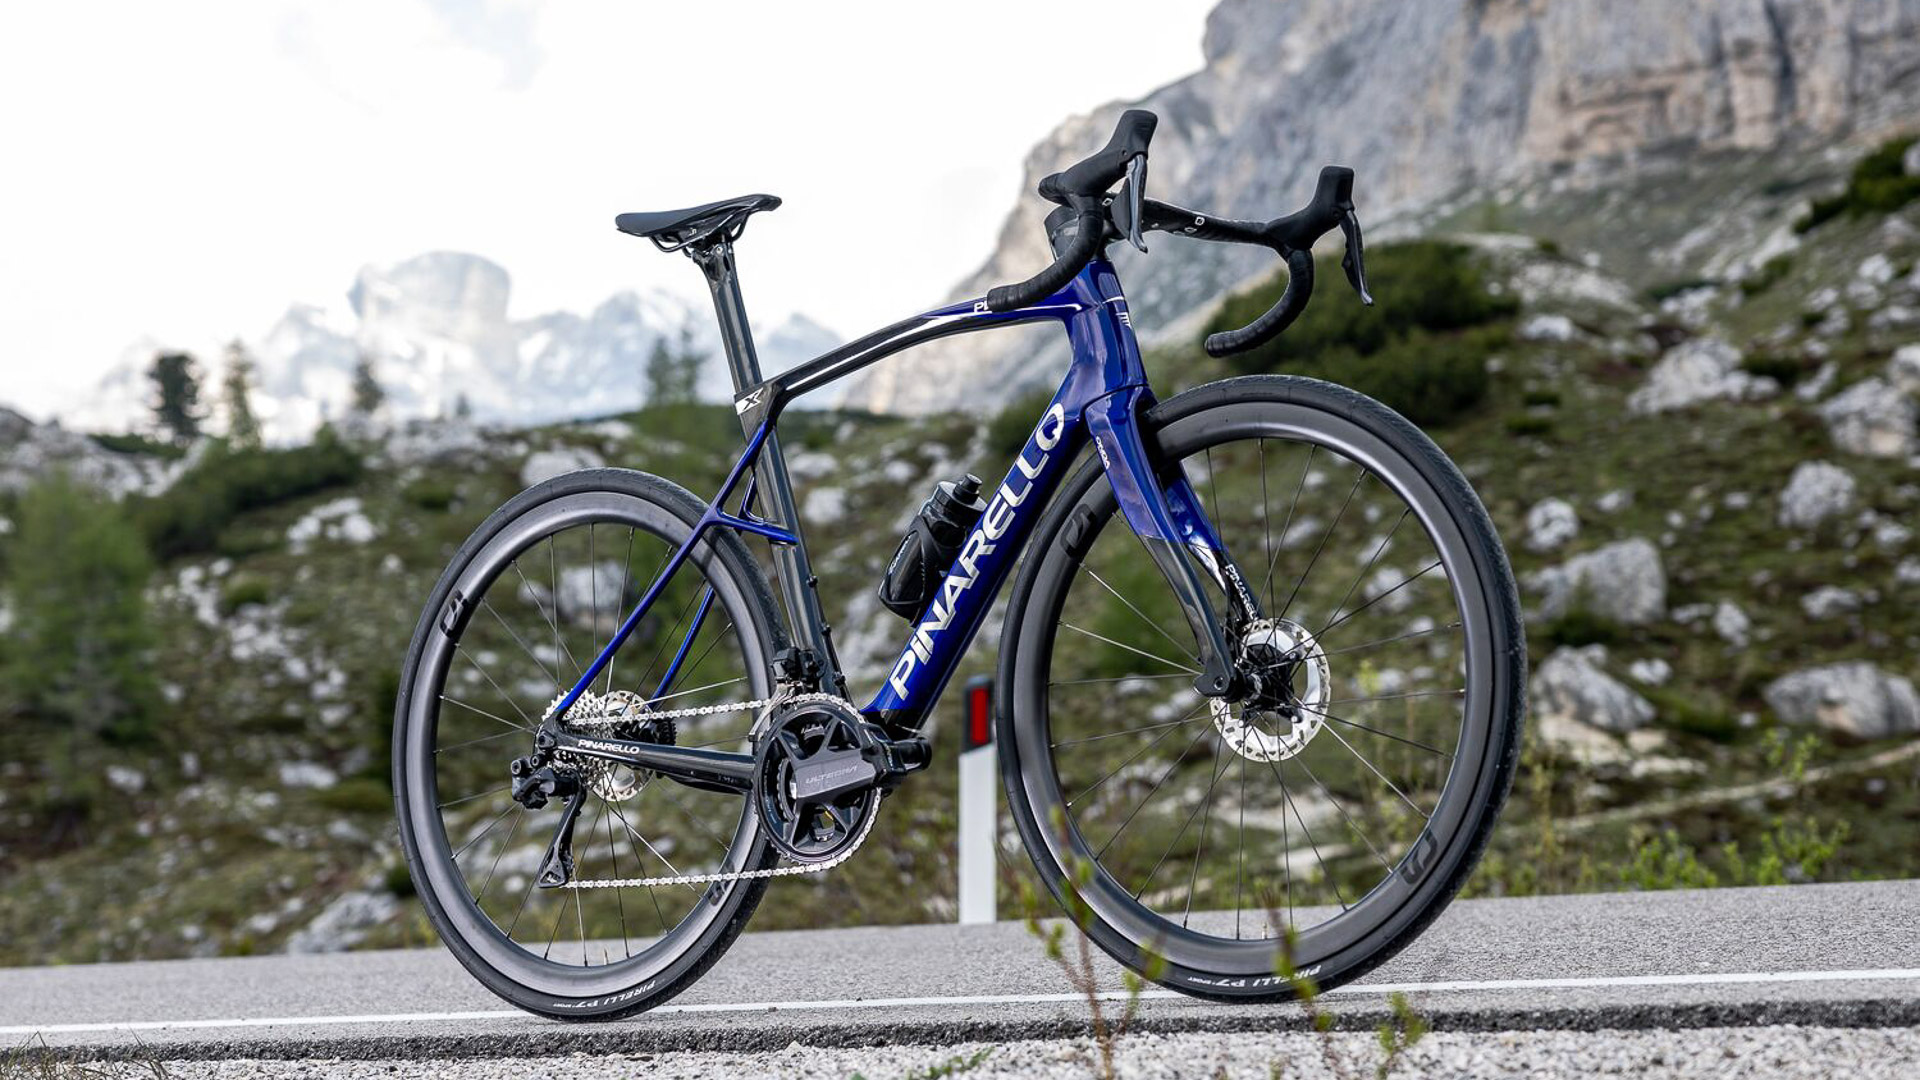 The new Pinarello X7 with a black and blue paint design along a roadside in a mountainous setting. 